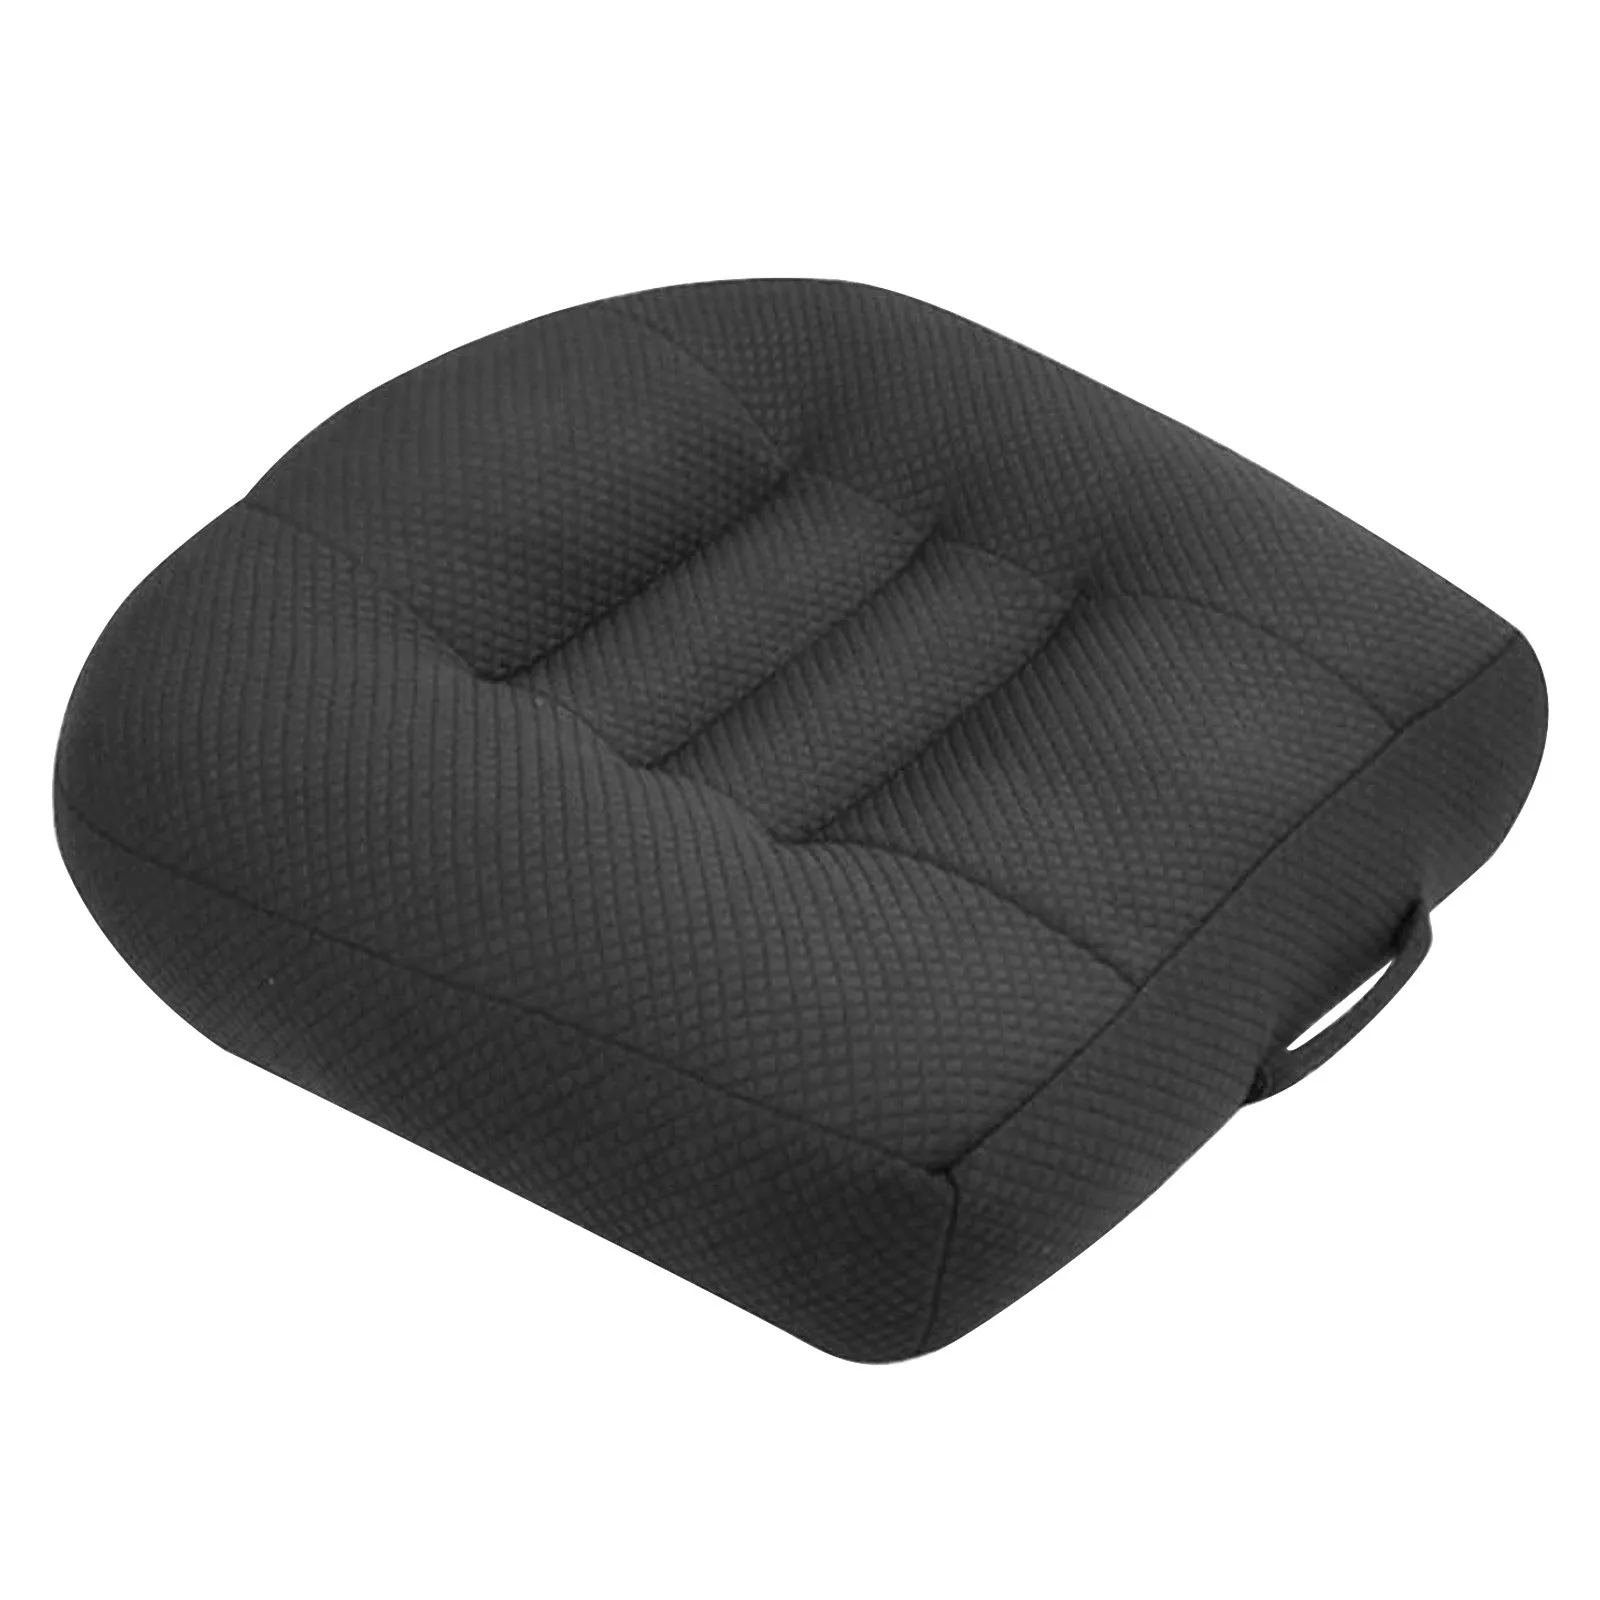 

Square Chair Pad Winter Thicker Seat Cushion For Dining Patio Home Bedroom Office Indoor Outdoor Garden Sofa Buttocks Cushion